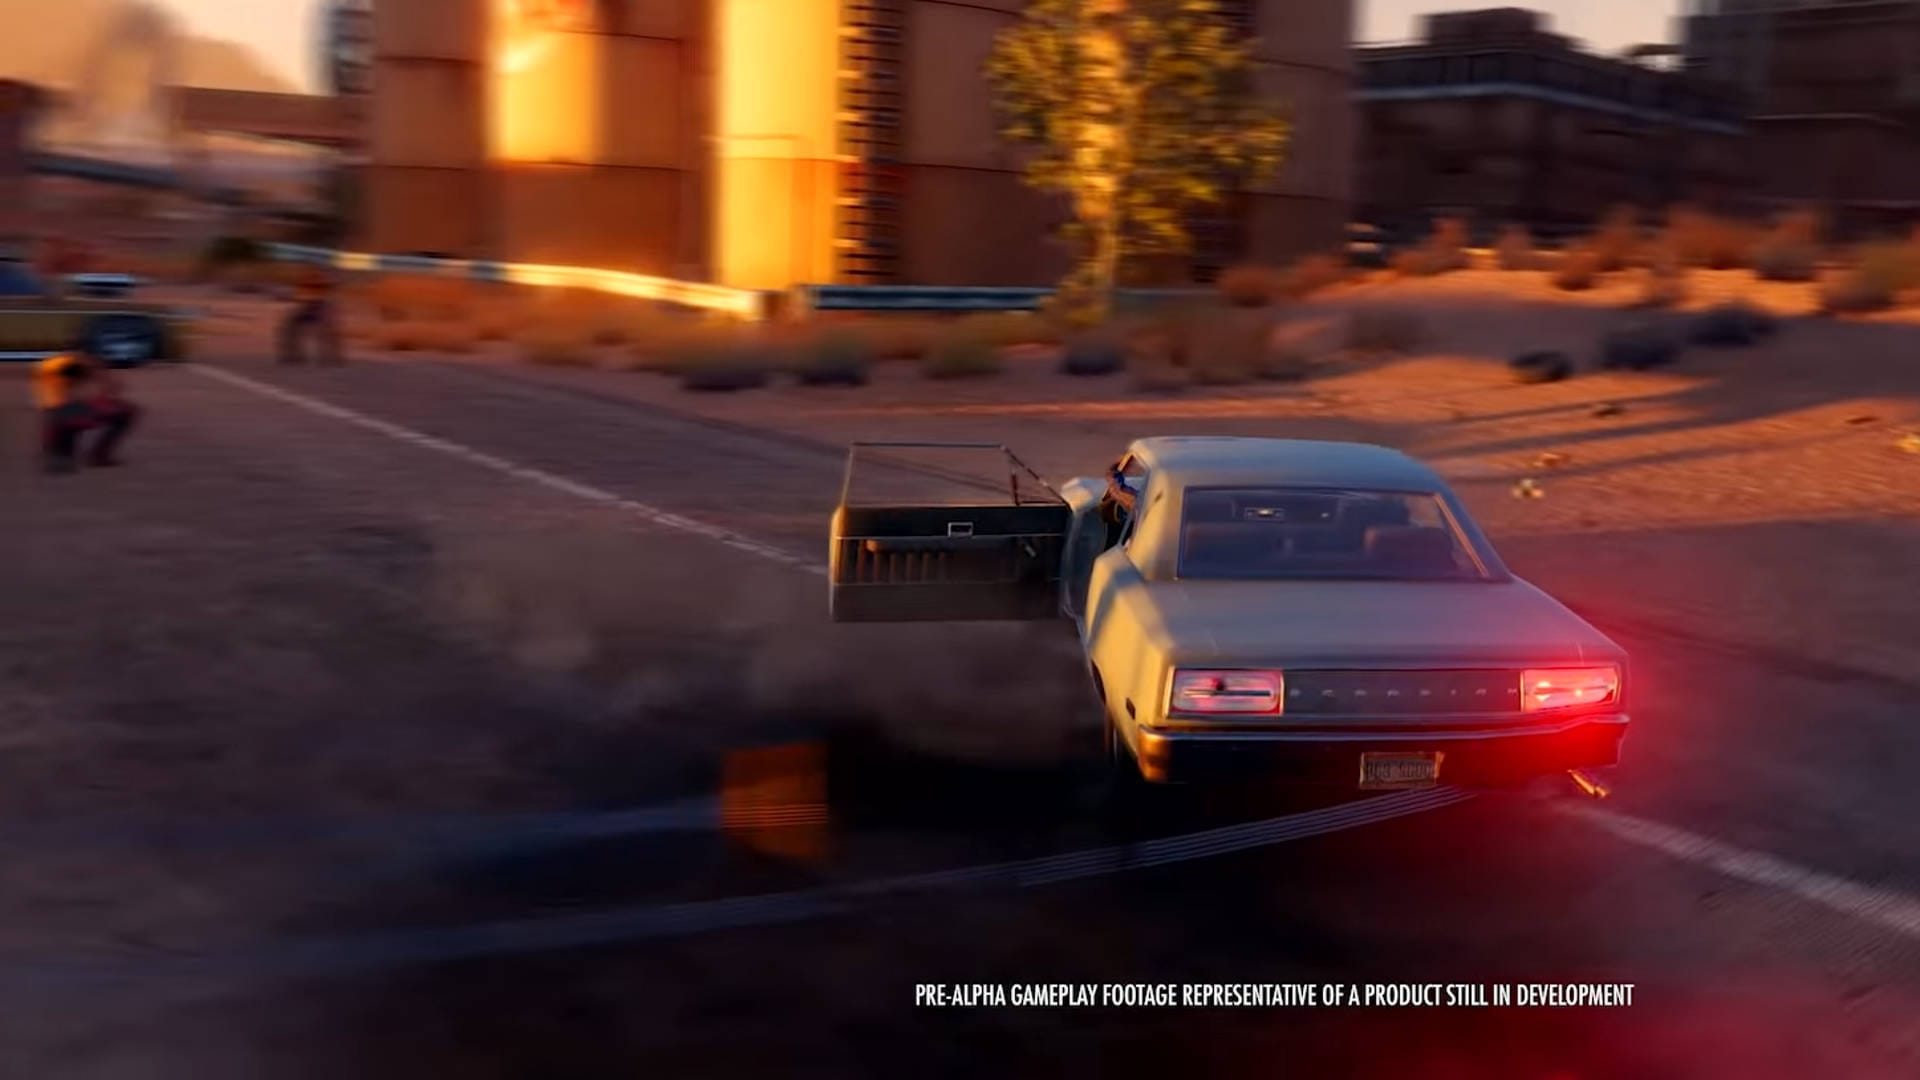 New Saints Row video offers a look at actual gameplay, following fan  criticism